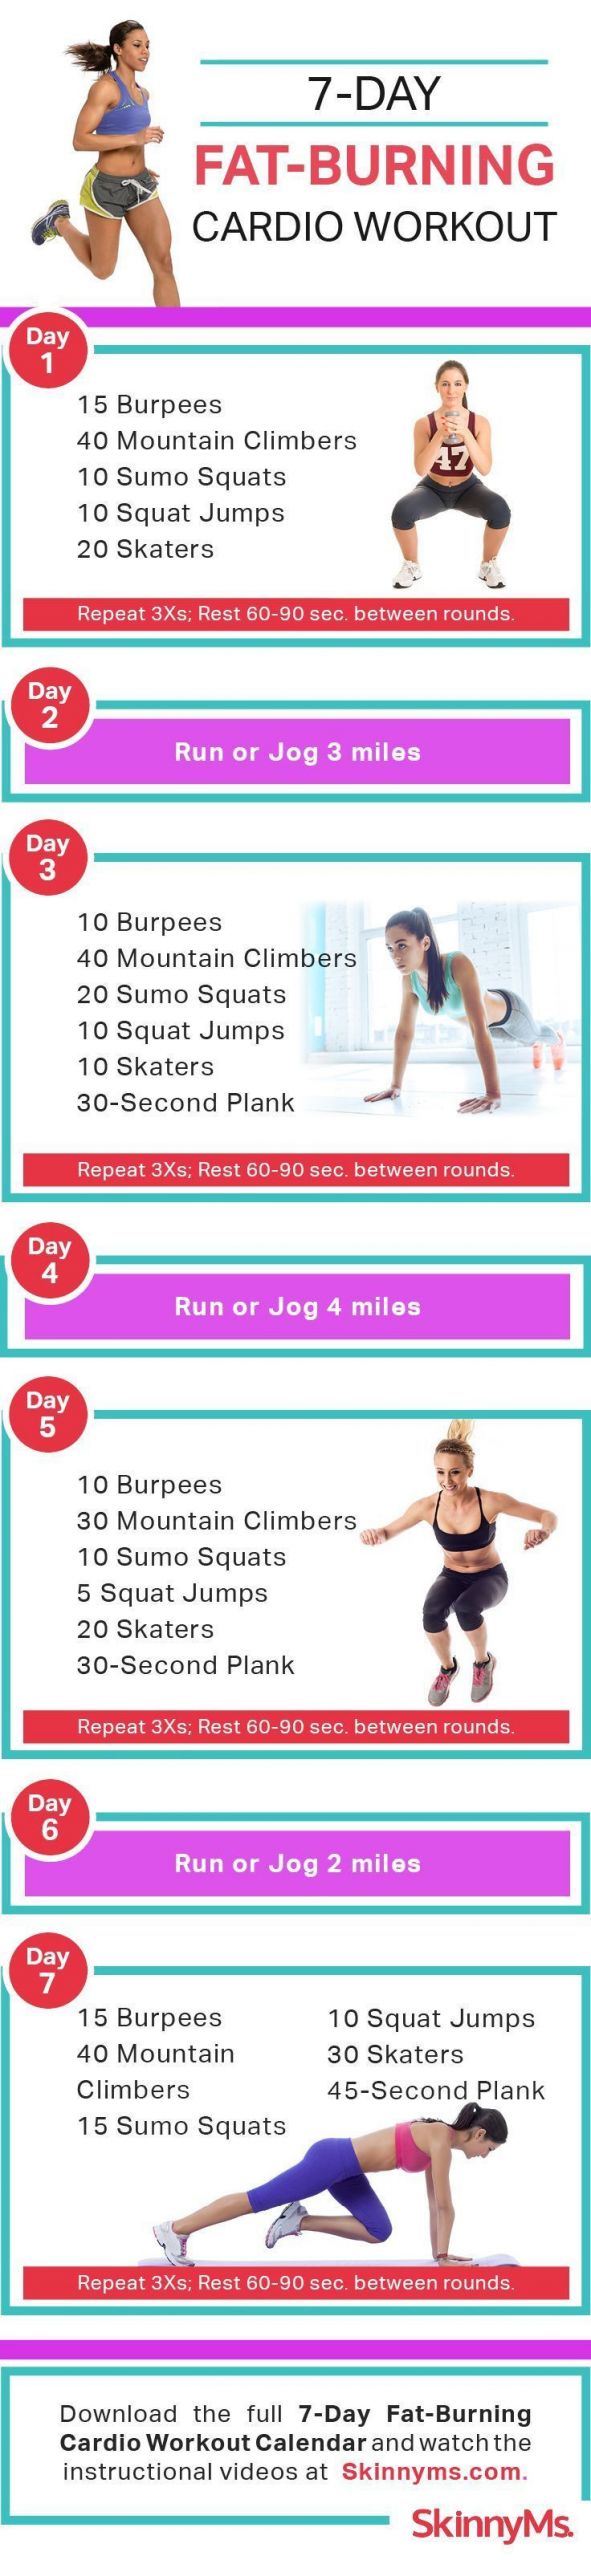 Weight Loss Exercises At Home Fat Burning Cardio Workouts
 7769 best Skinny Ms Fitness images on Pinterest